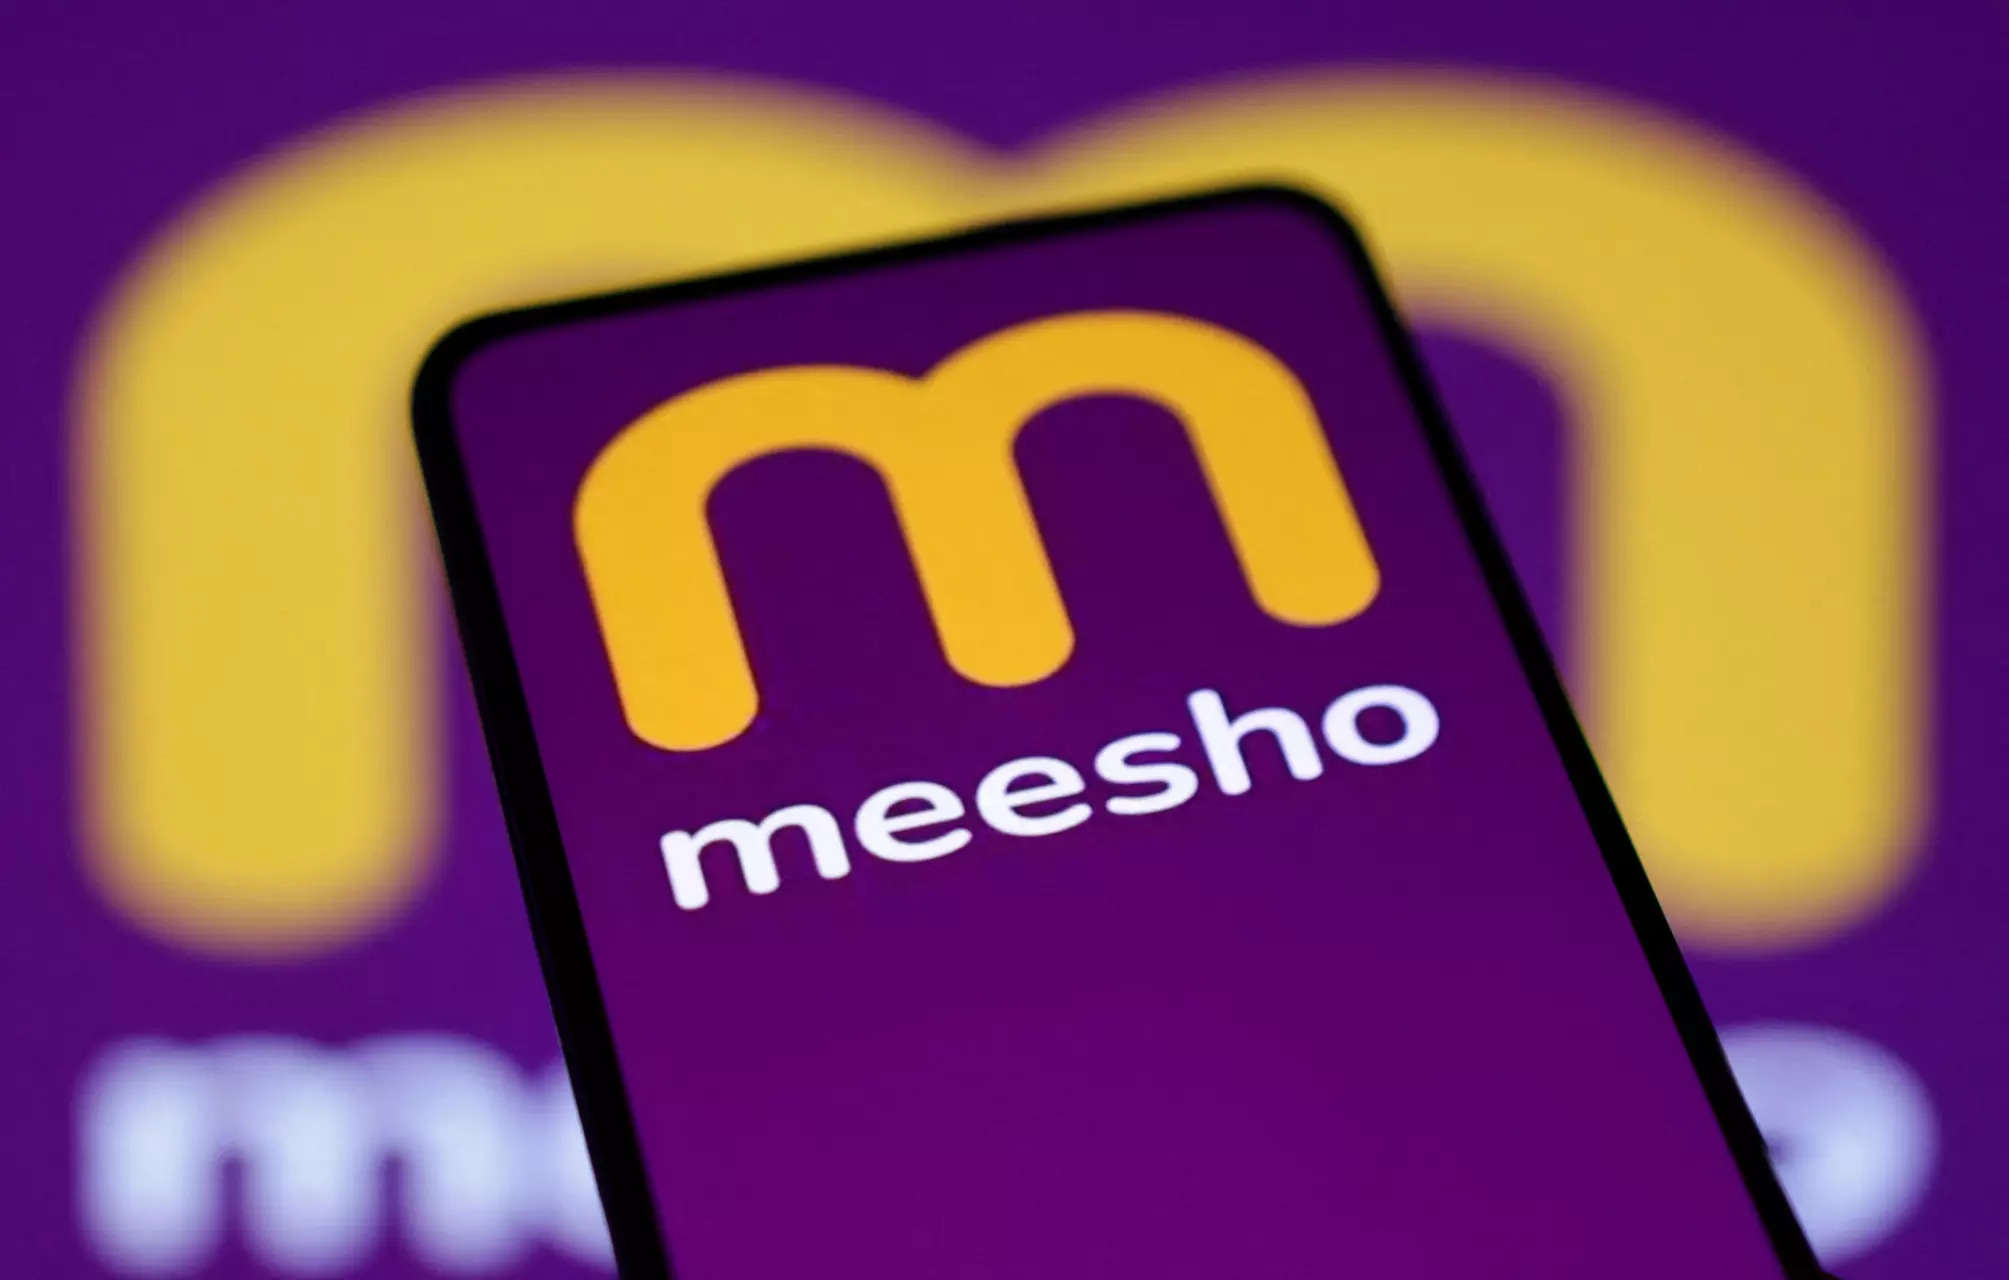 Meesho expands into branded products segment with Meesho Mall, ET